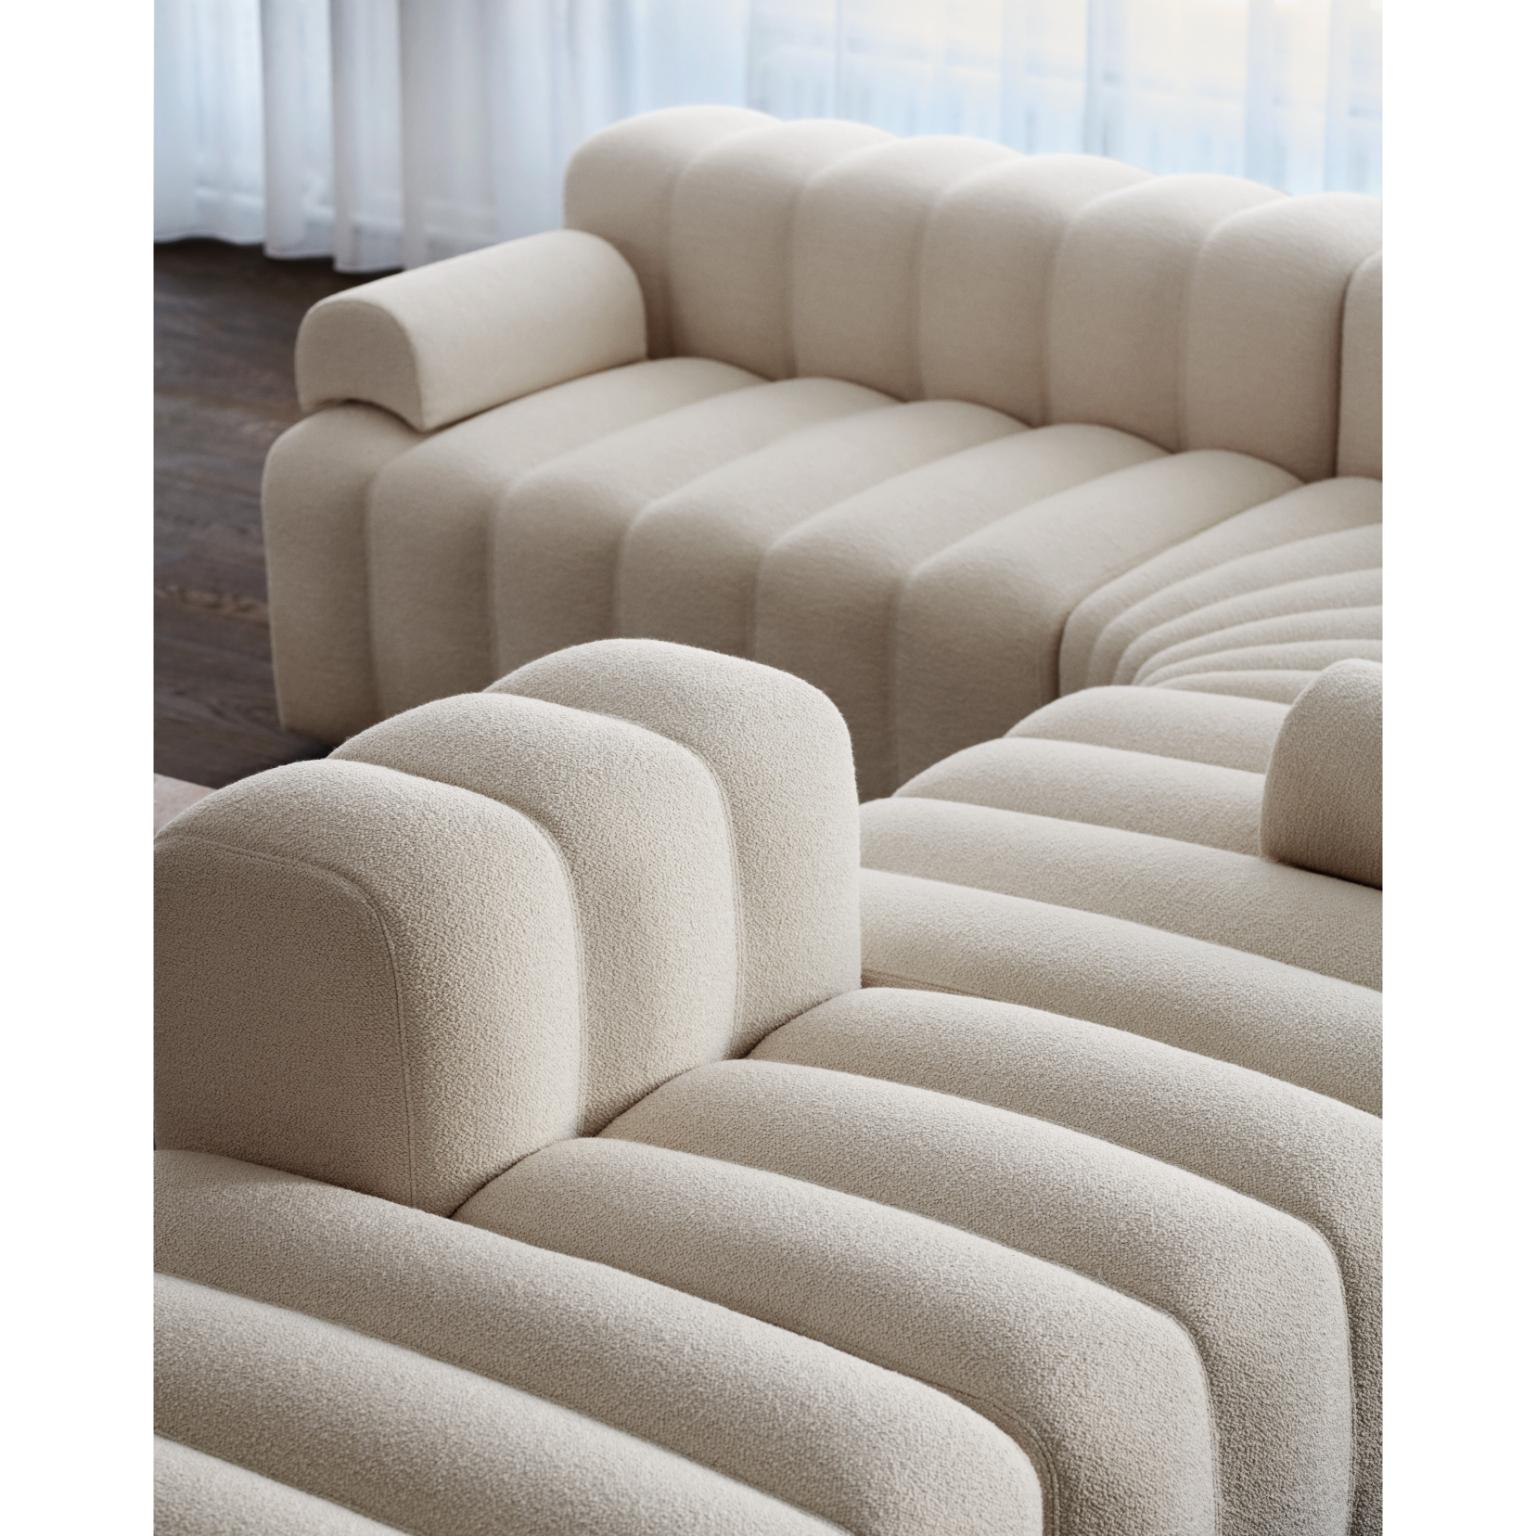 Studio Medium Left Modular Sofa With Armrest by NORR11
Dimensions: D 96 x W 113 x H 70 cm. SH 47 cm. 
Materials: Foam, wood and upholstery.
Upholstery: Barnum Boucle Color 3.

Available in different upholstery options. A plywood structure with